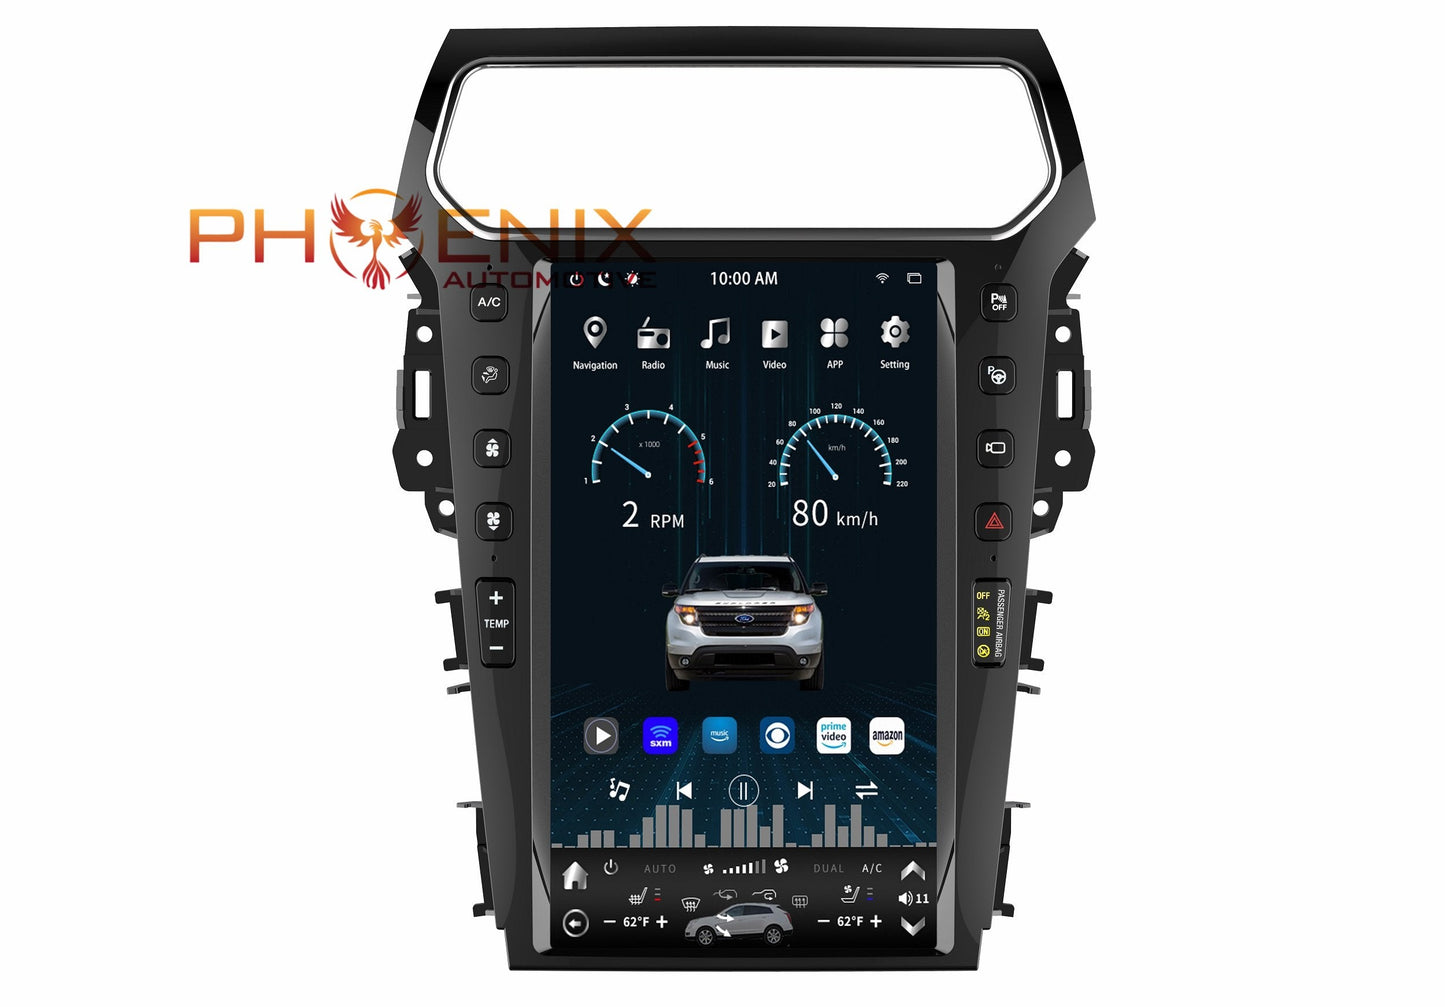 [ Pre-order ] 13.6" Android 10 Vertical Screen Navigation Radio for Ford Explorer 2011 - 2019 - Smart Car Stereo Radio Navigation | In-Dash audio/video players online - Phoenix Automotive